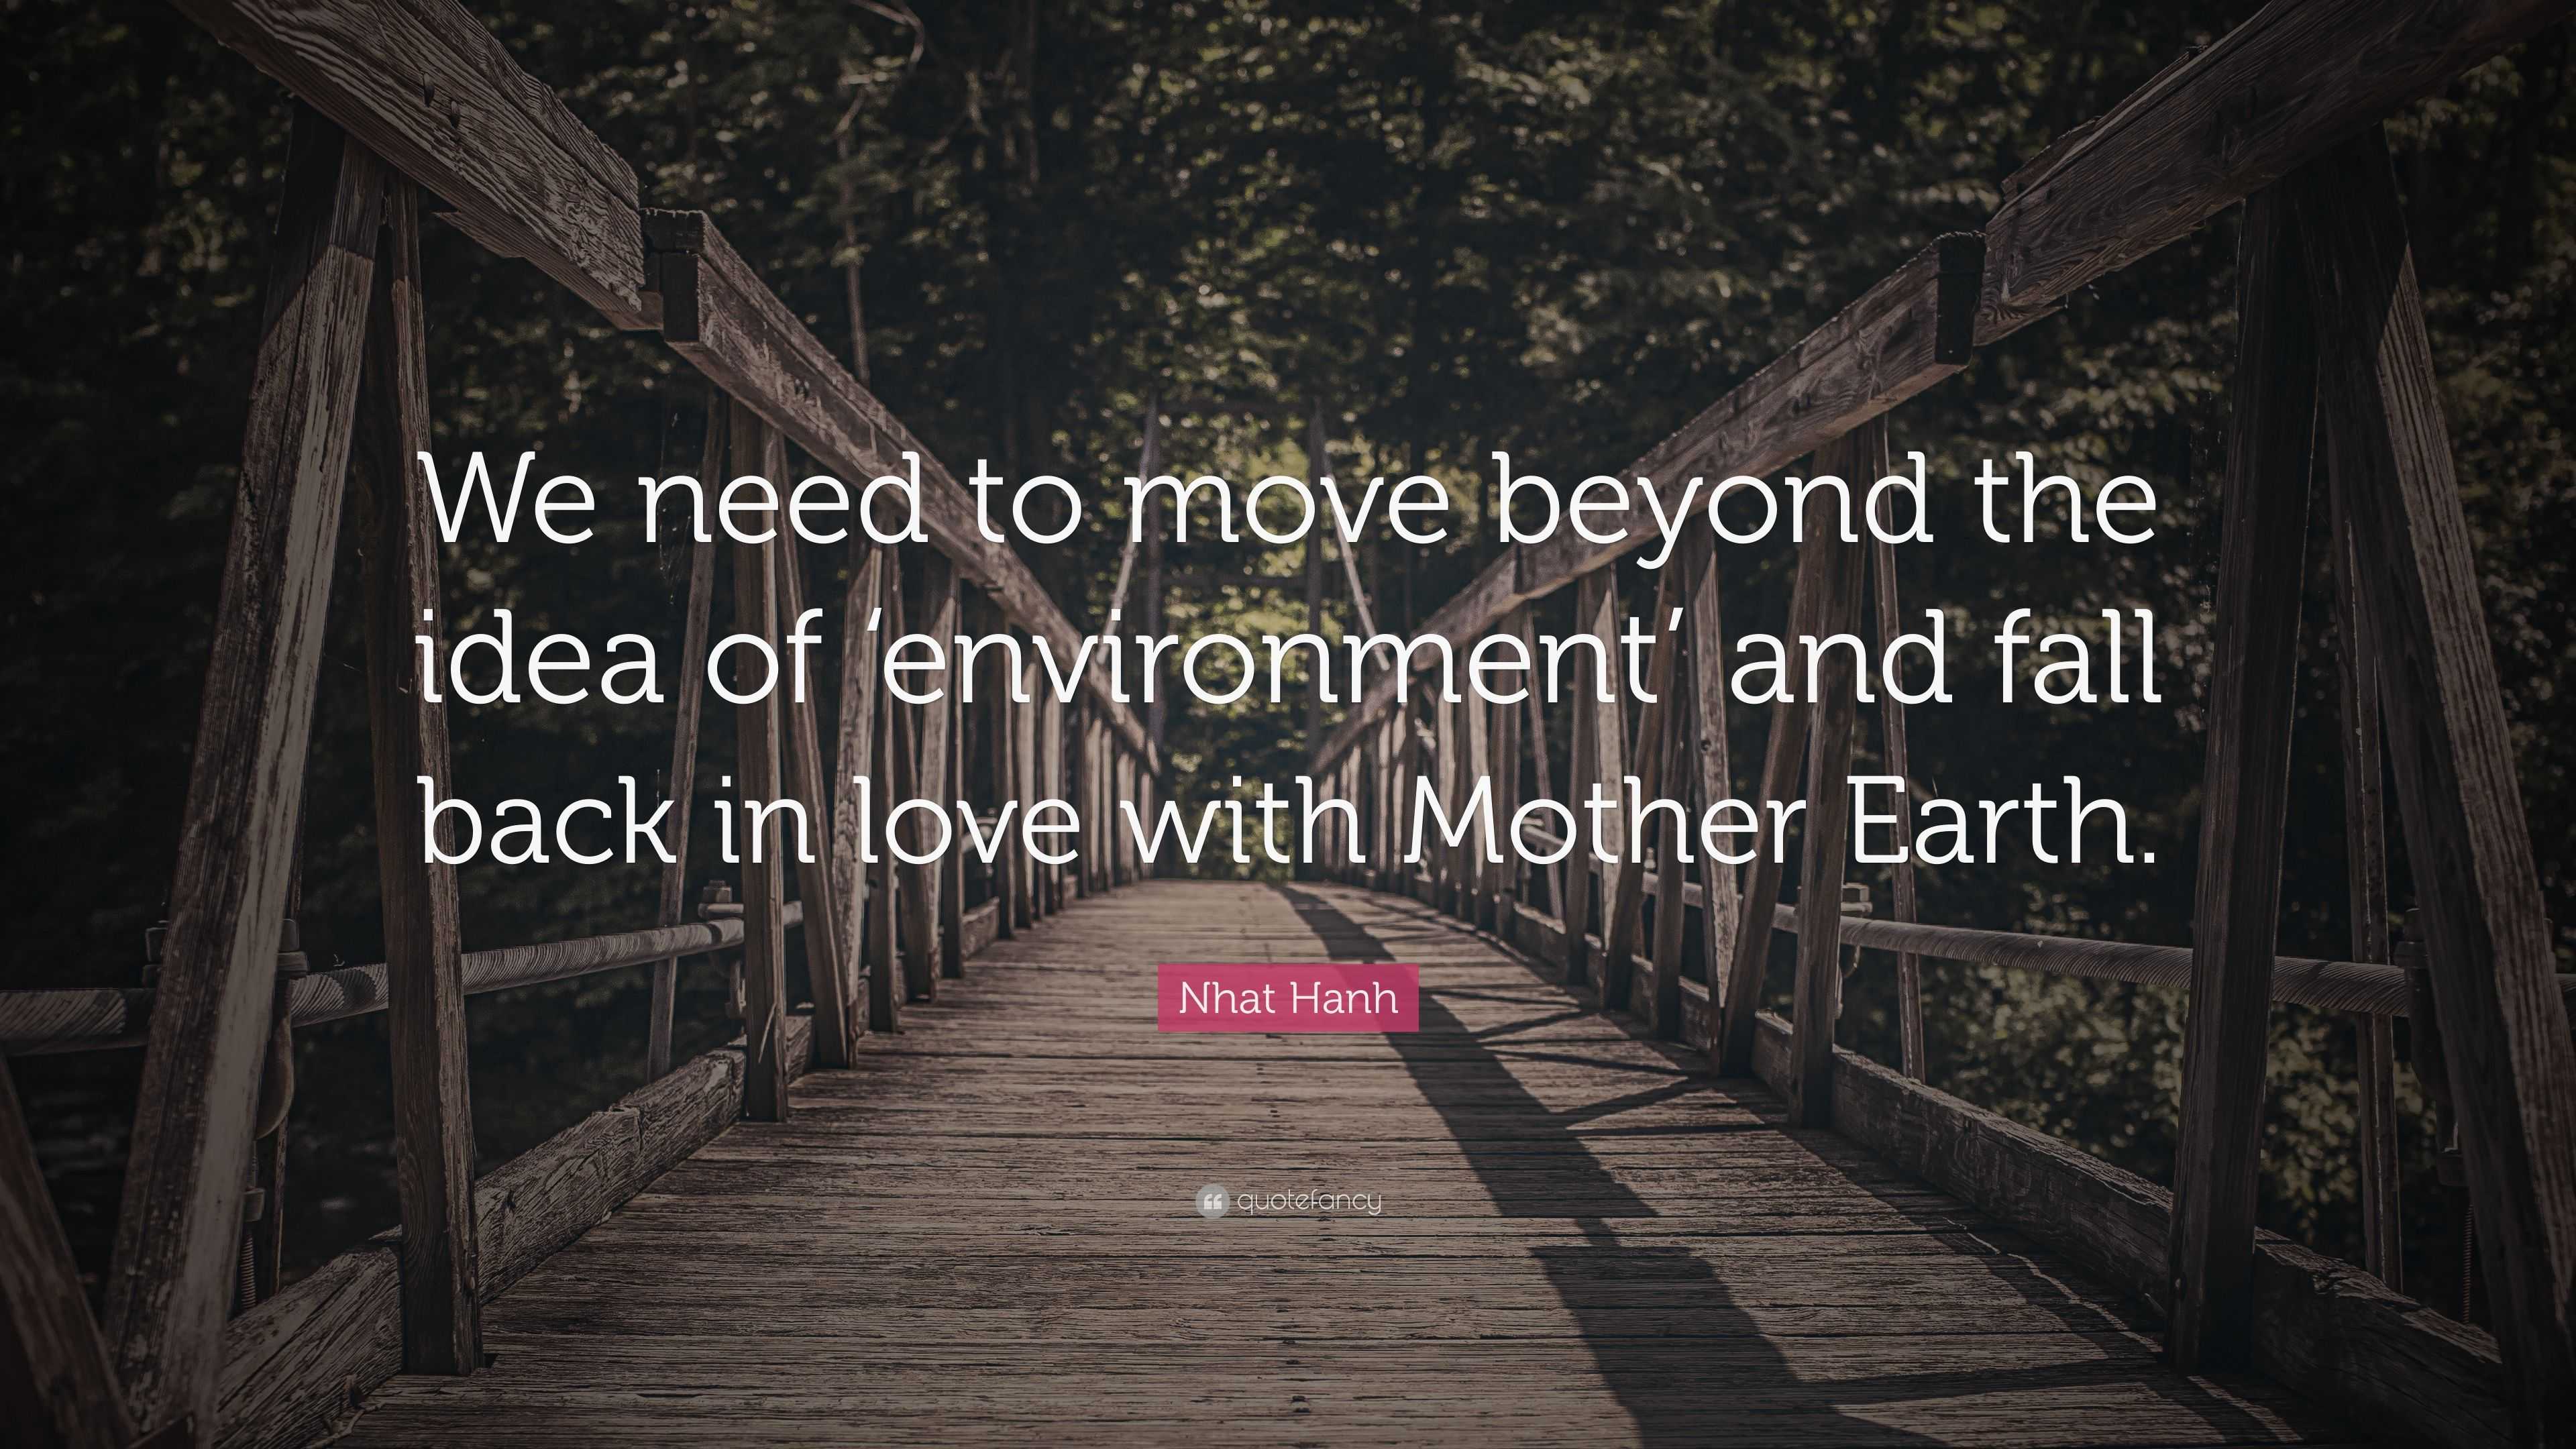 Nhat Hanh Quote “We need to move beyond the idea of environment